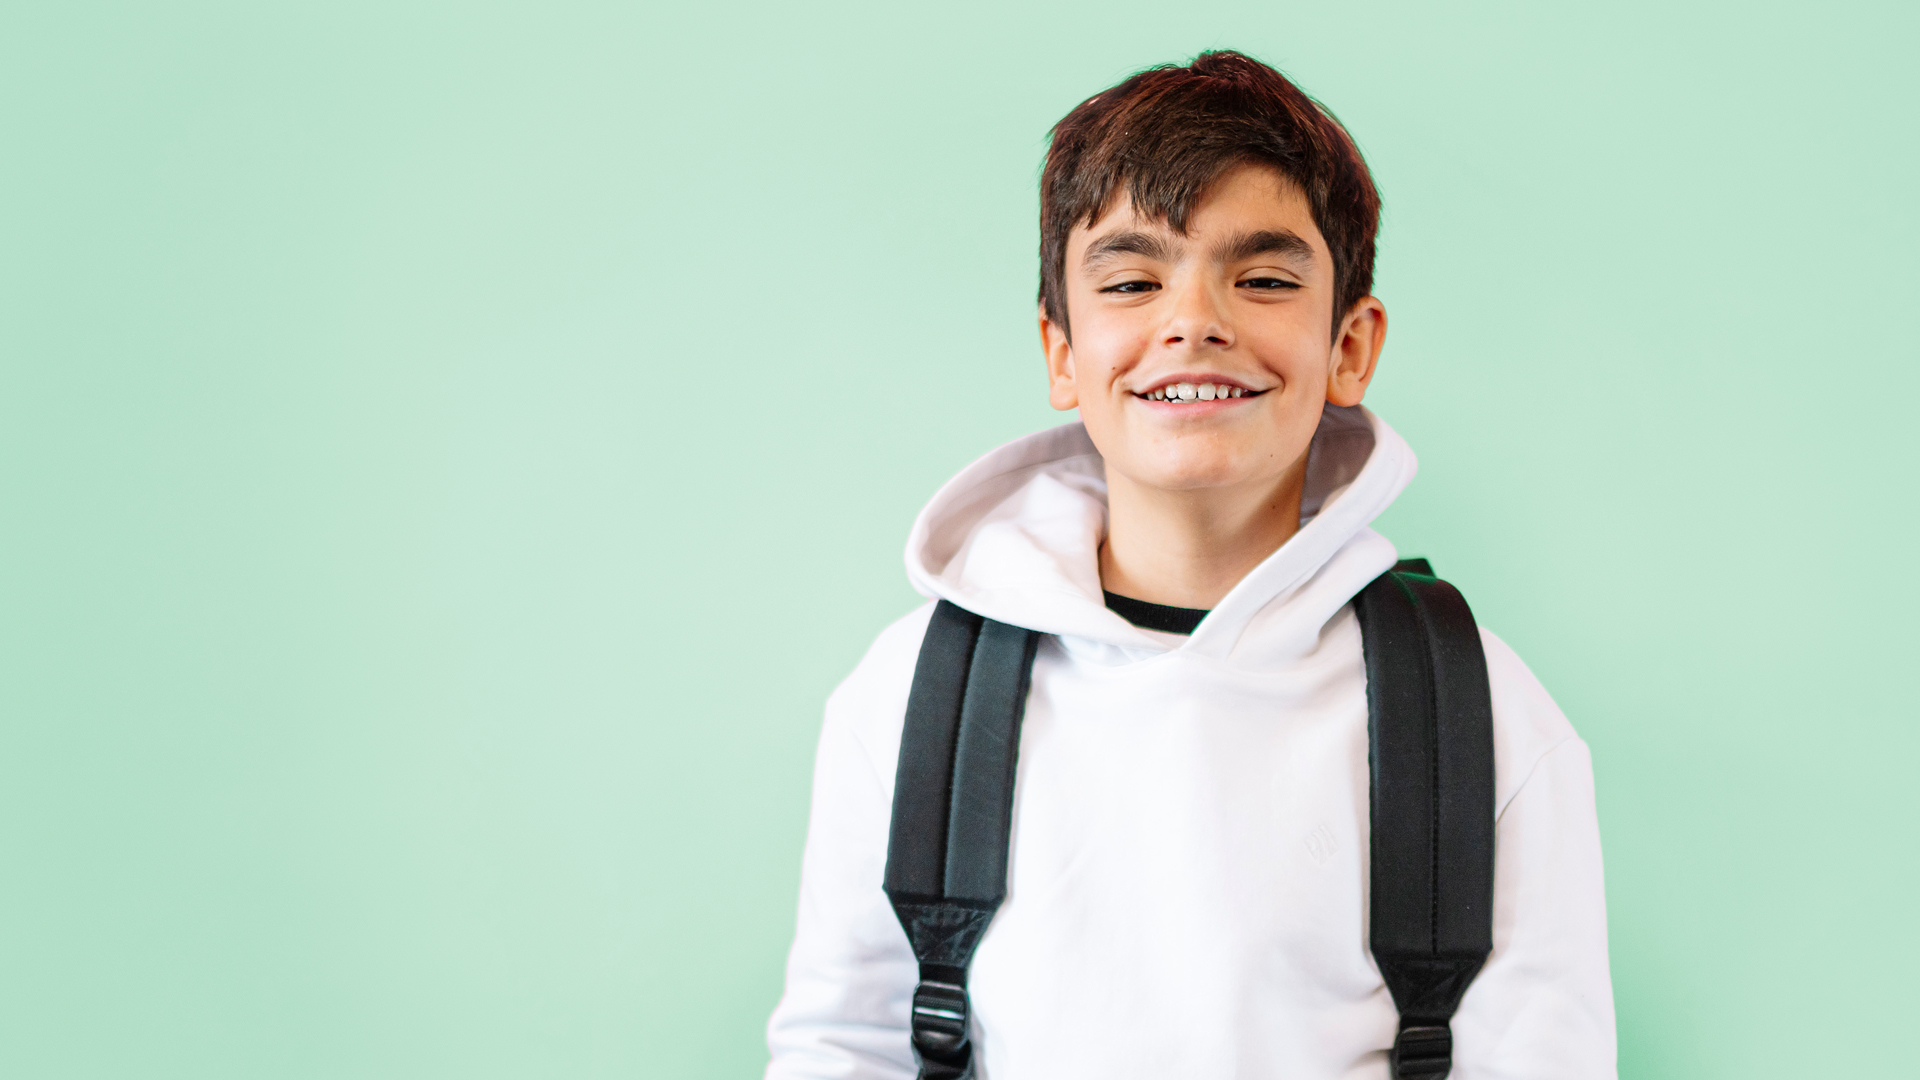 Smiling preteen boy in a white sweatshirt and wearing a backpack